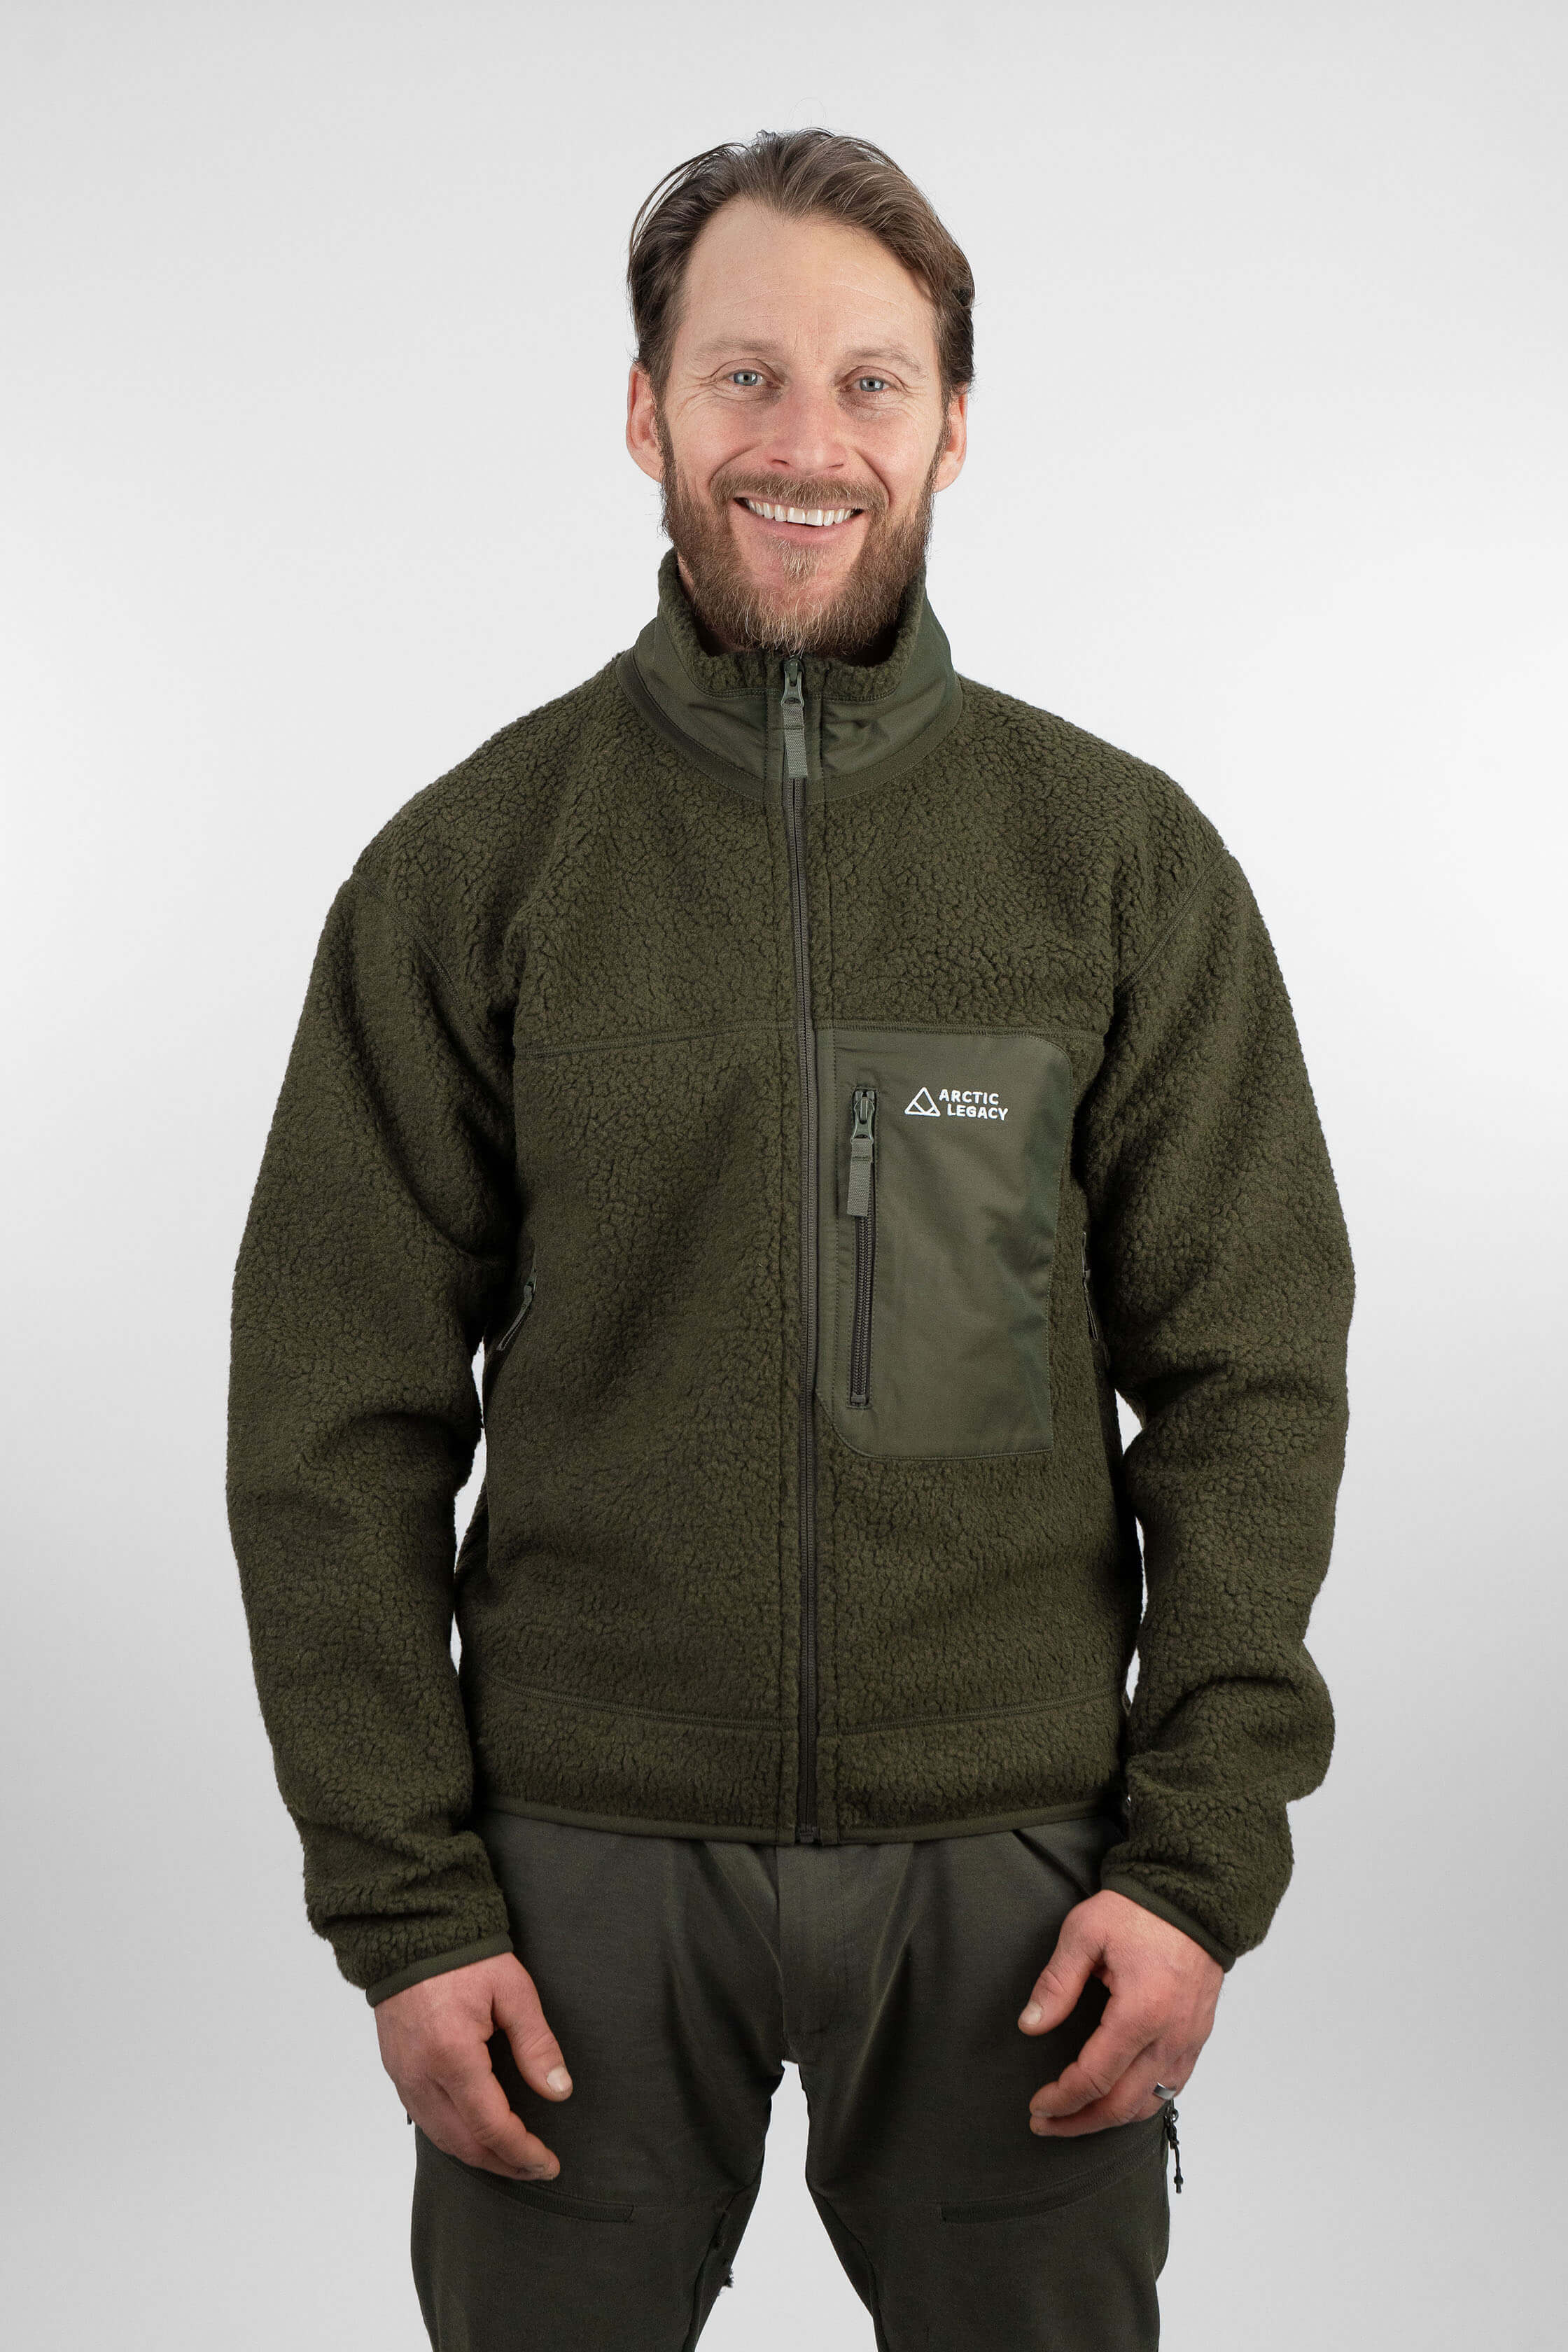 Sustainable Outdoor Tops for Men - Made in Europe - Arctic Legacy